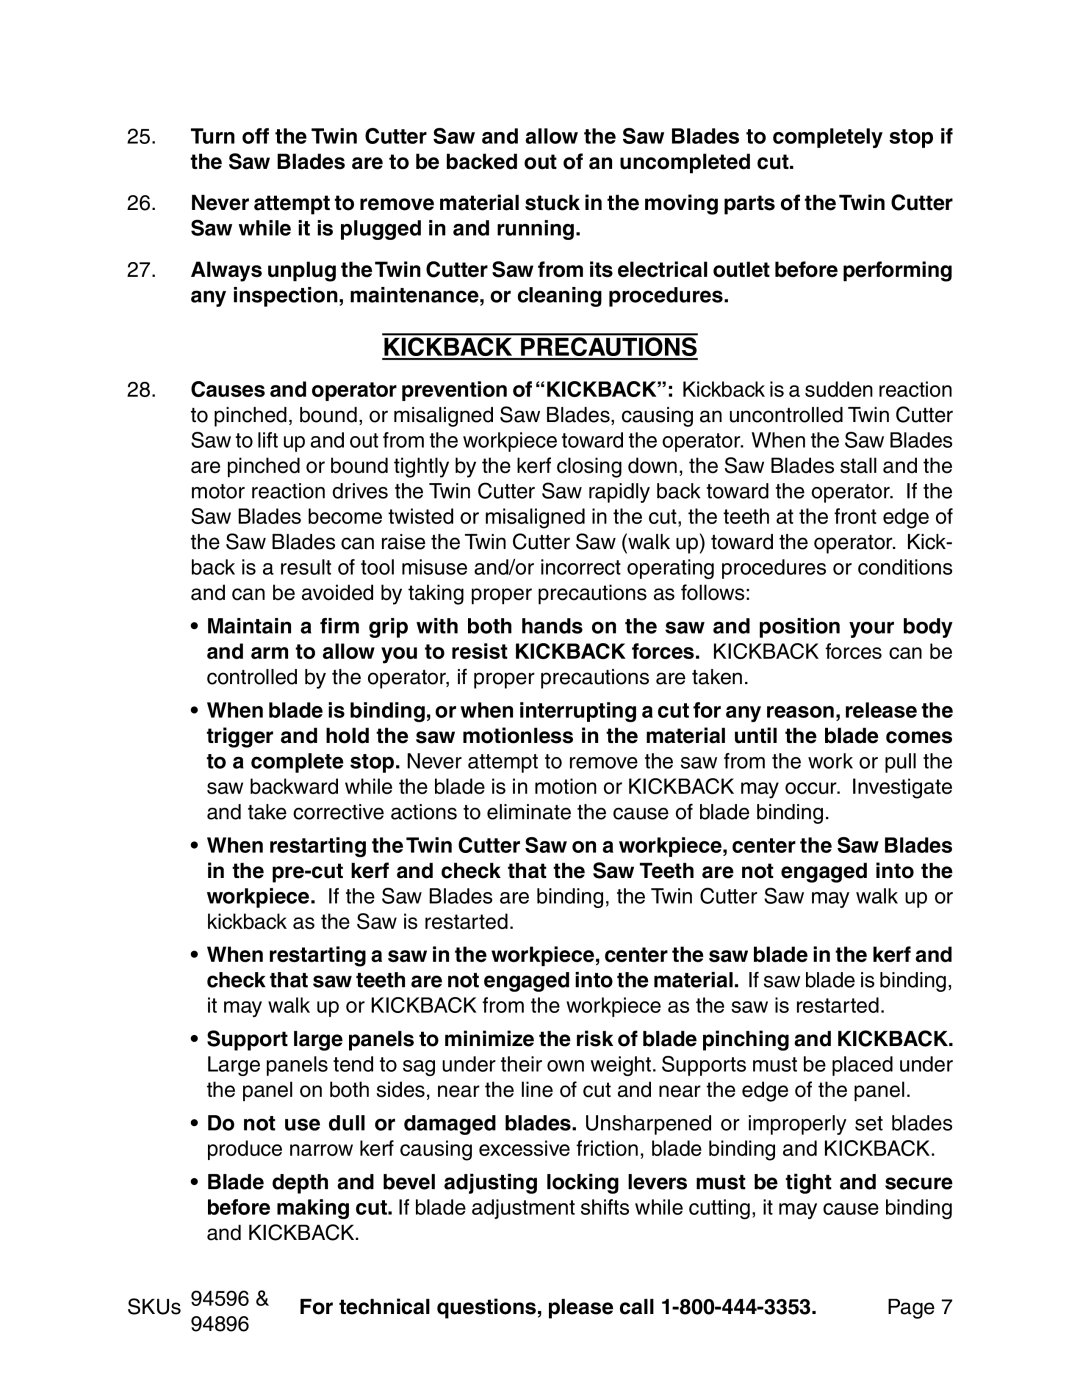 Chicago Electric 94596 manual Kickback Precautions, For technical questions, please call 